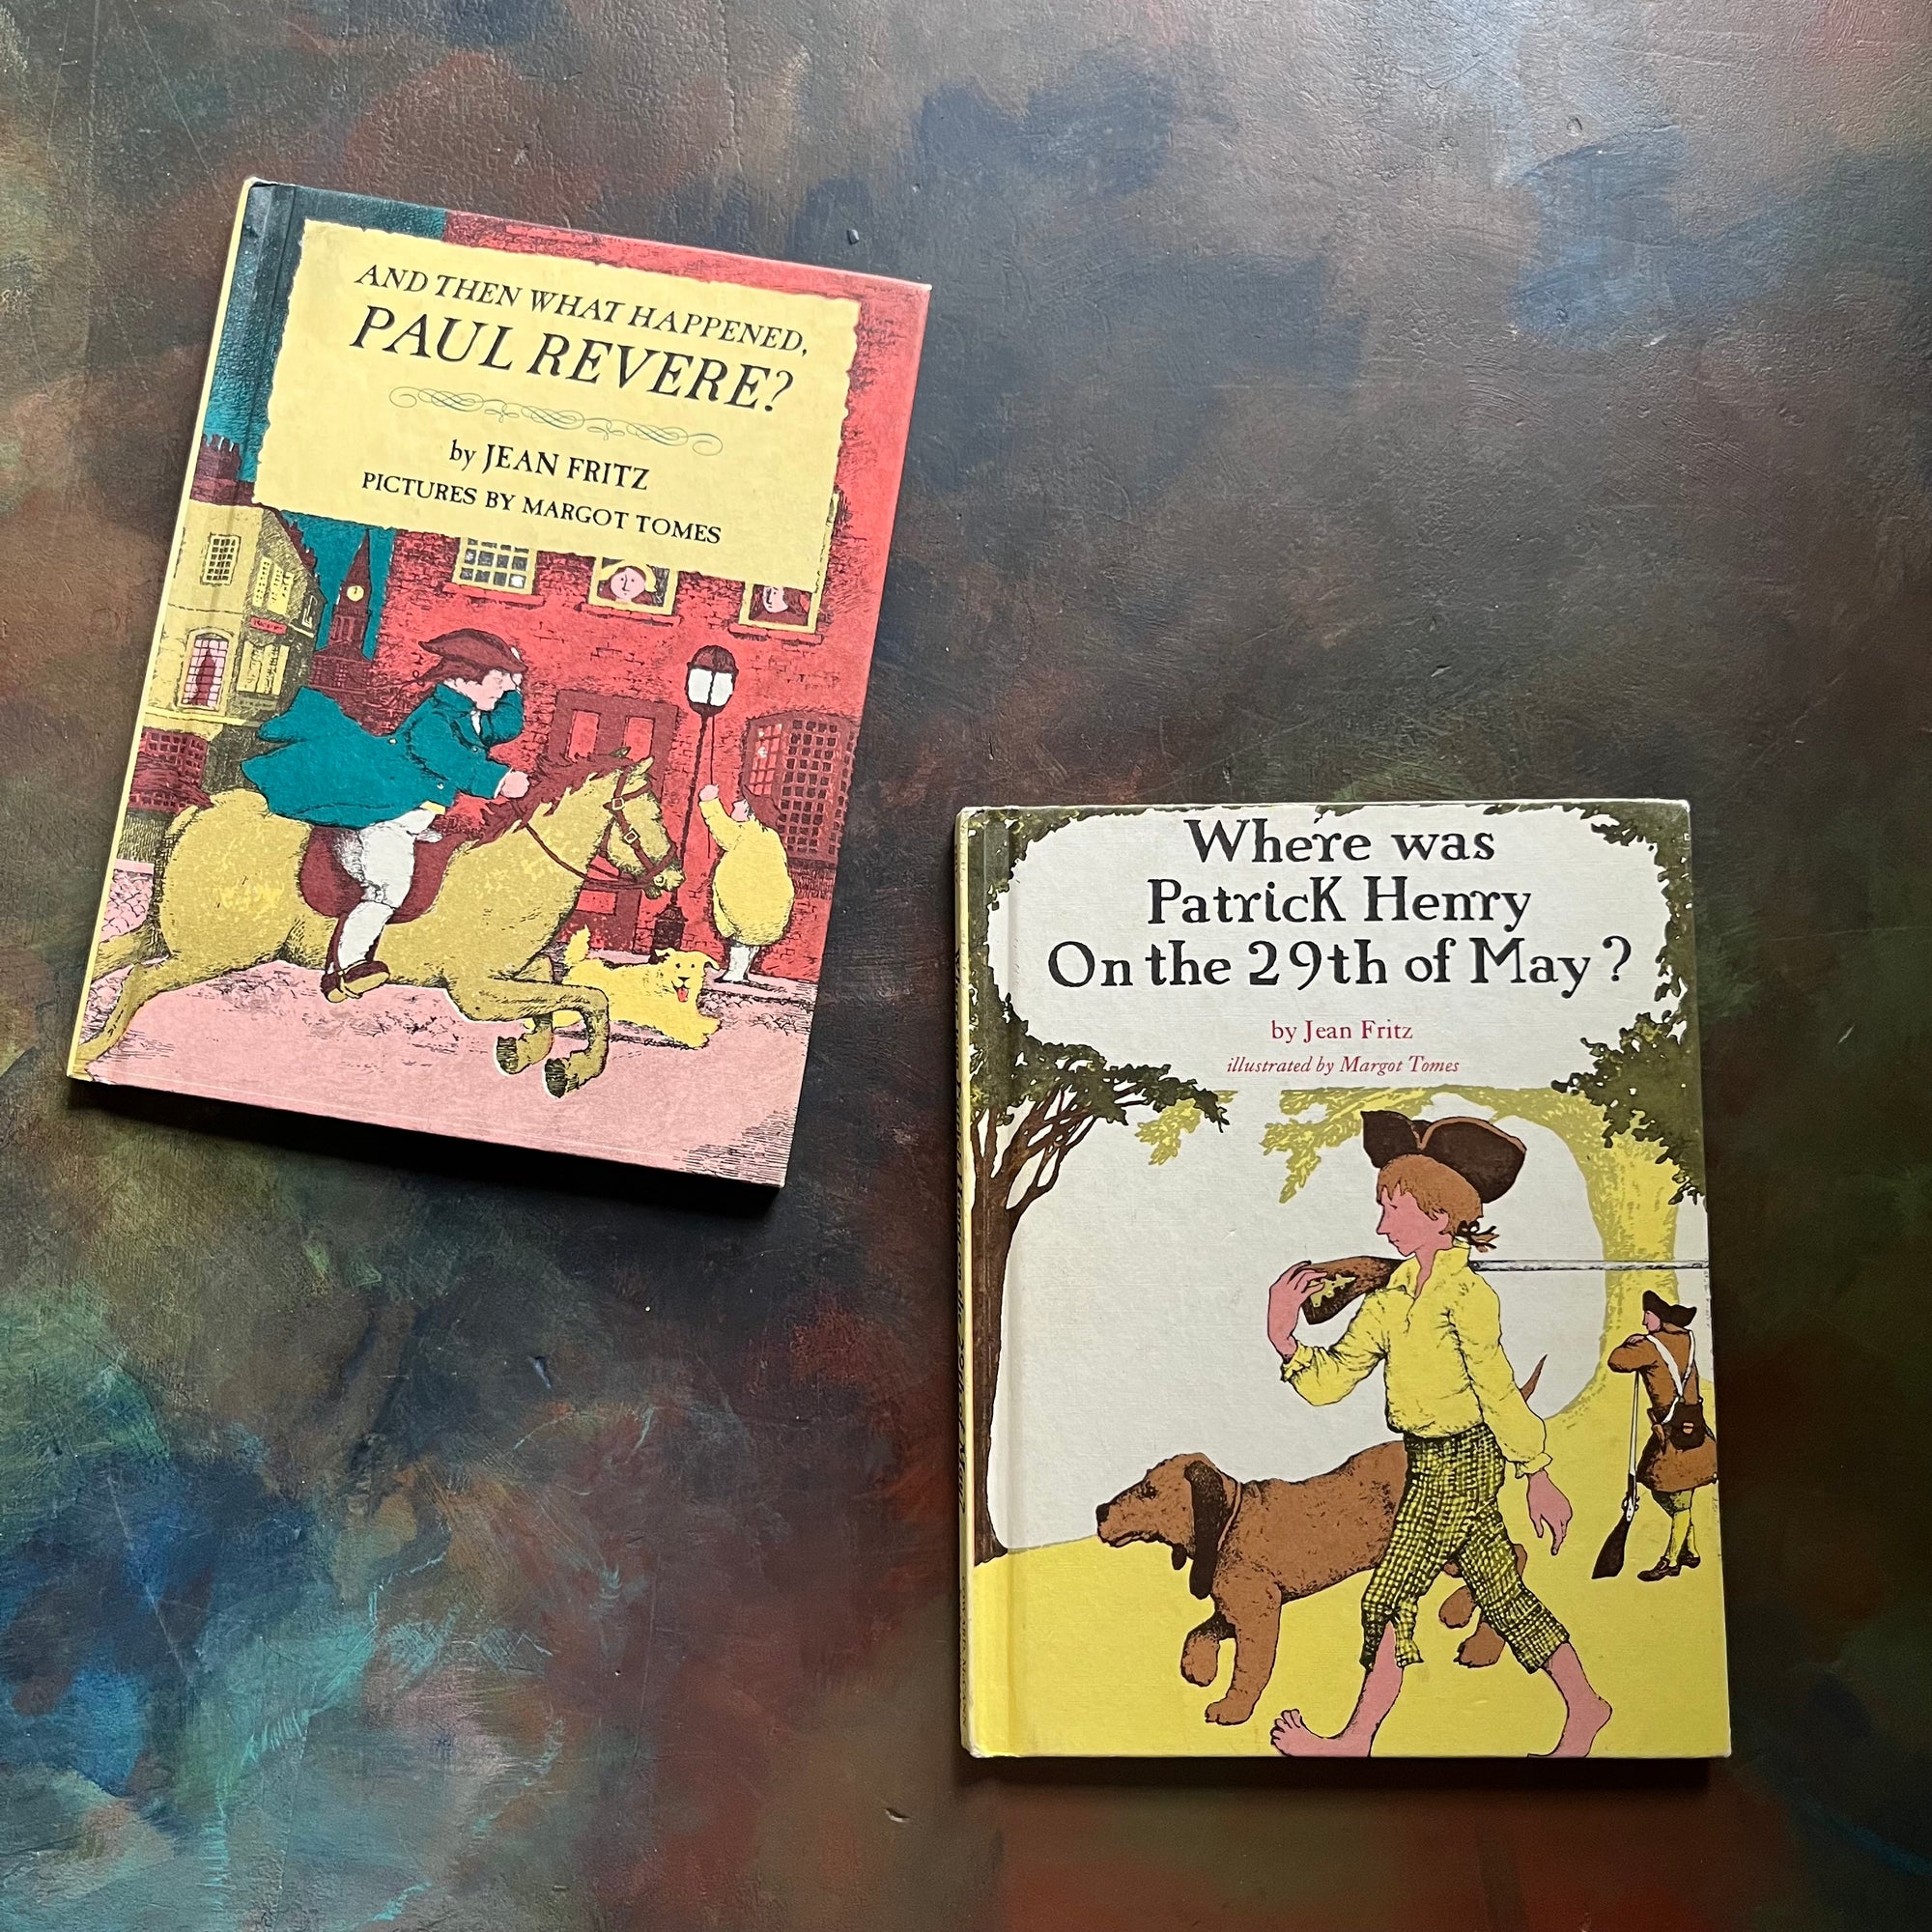 Pair of Jean Fritz Children's Picture Books with illustrations by Margot Tomes-Patrick Henry & Paul Revere-vintage children's history books-living history books-weekly reader books-view of the front covers